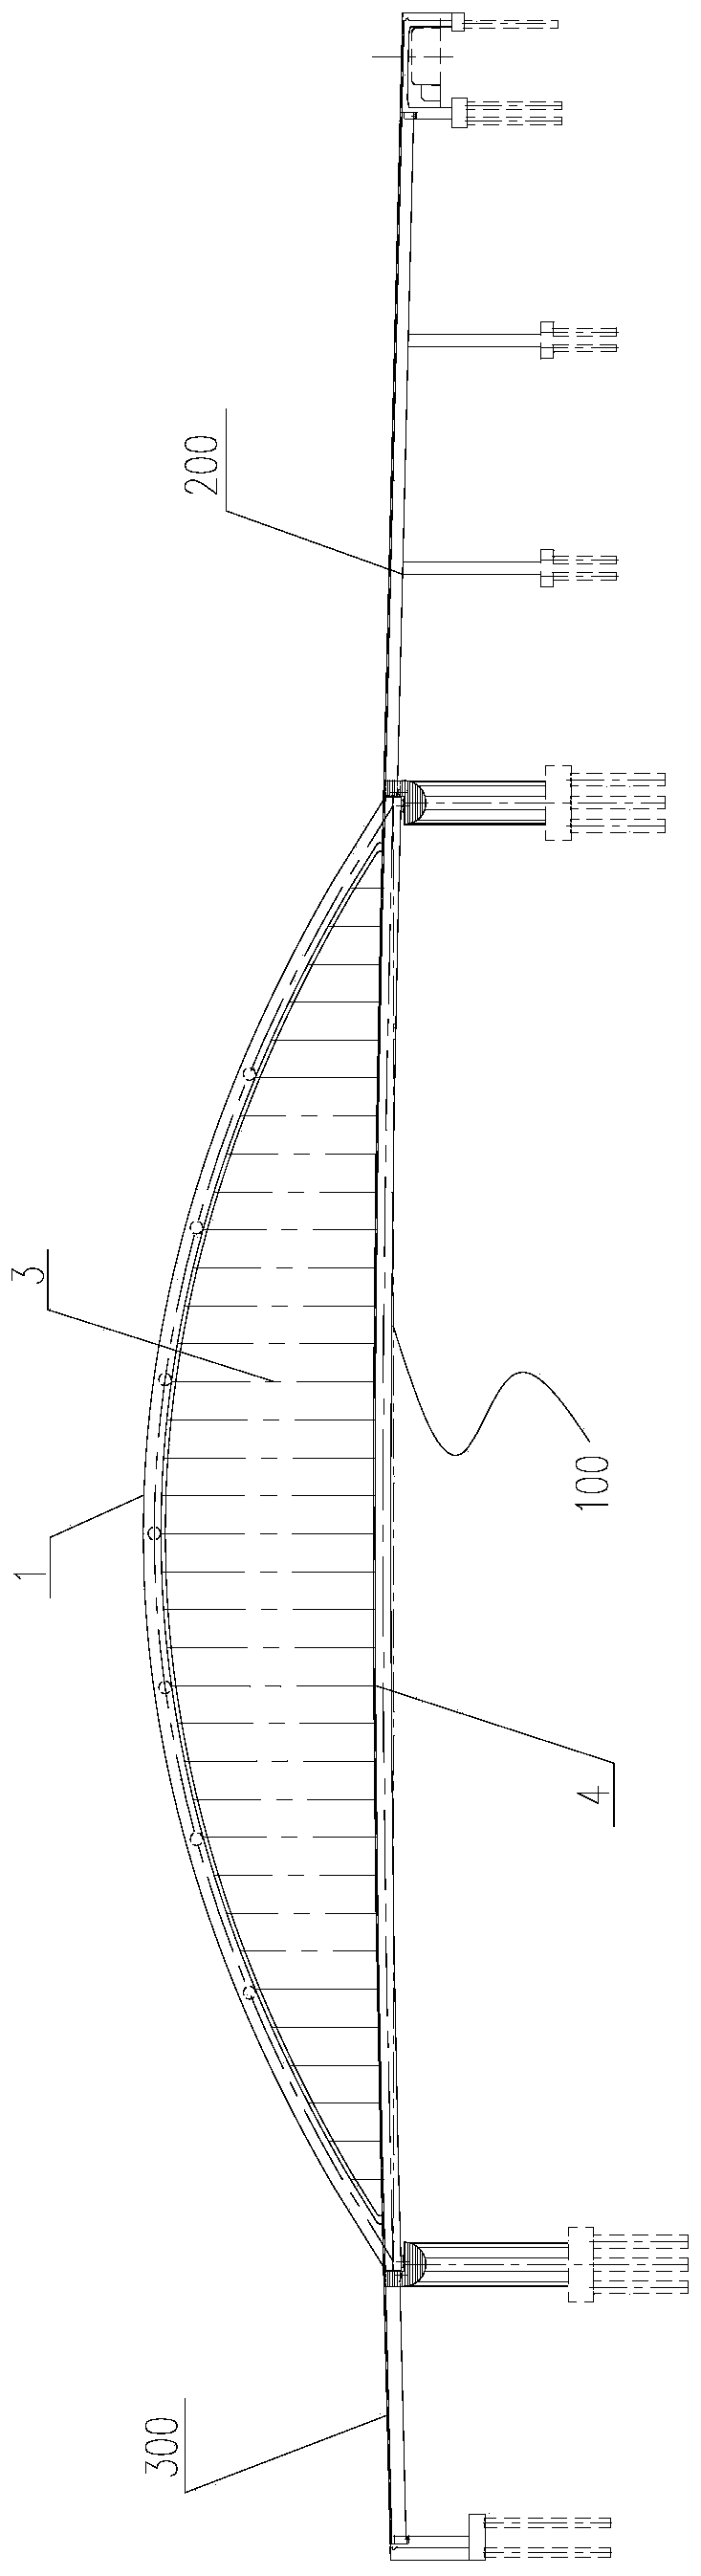 A construction method for the main bridge of the under-supported steel box arch bridge